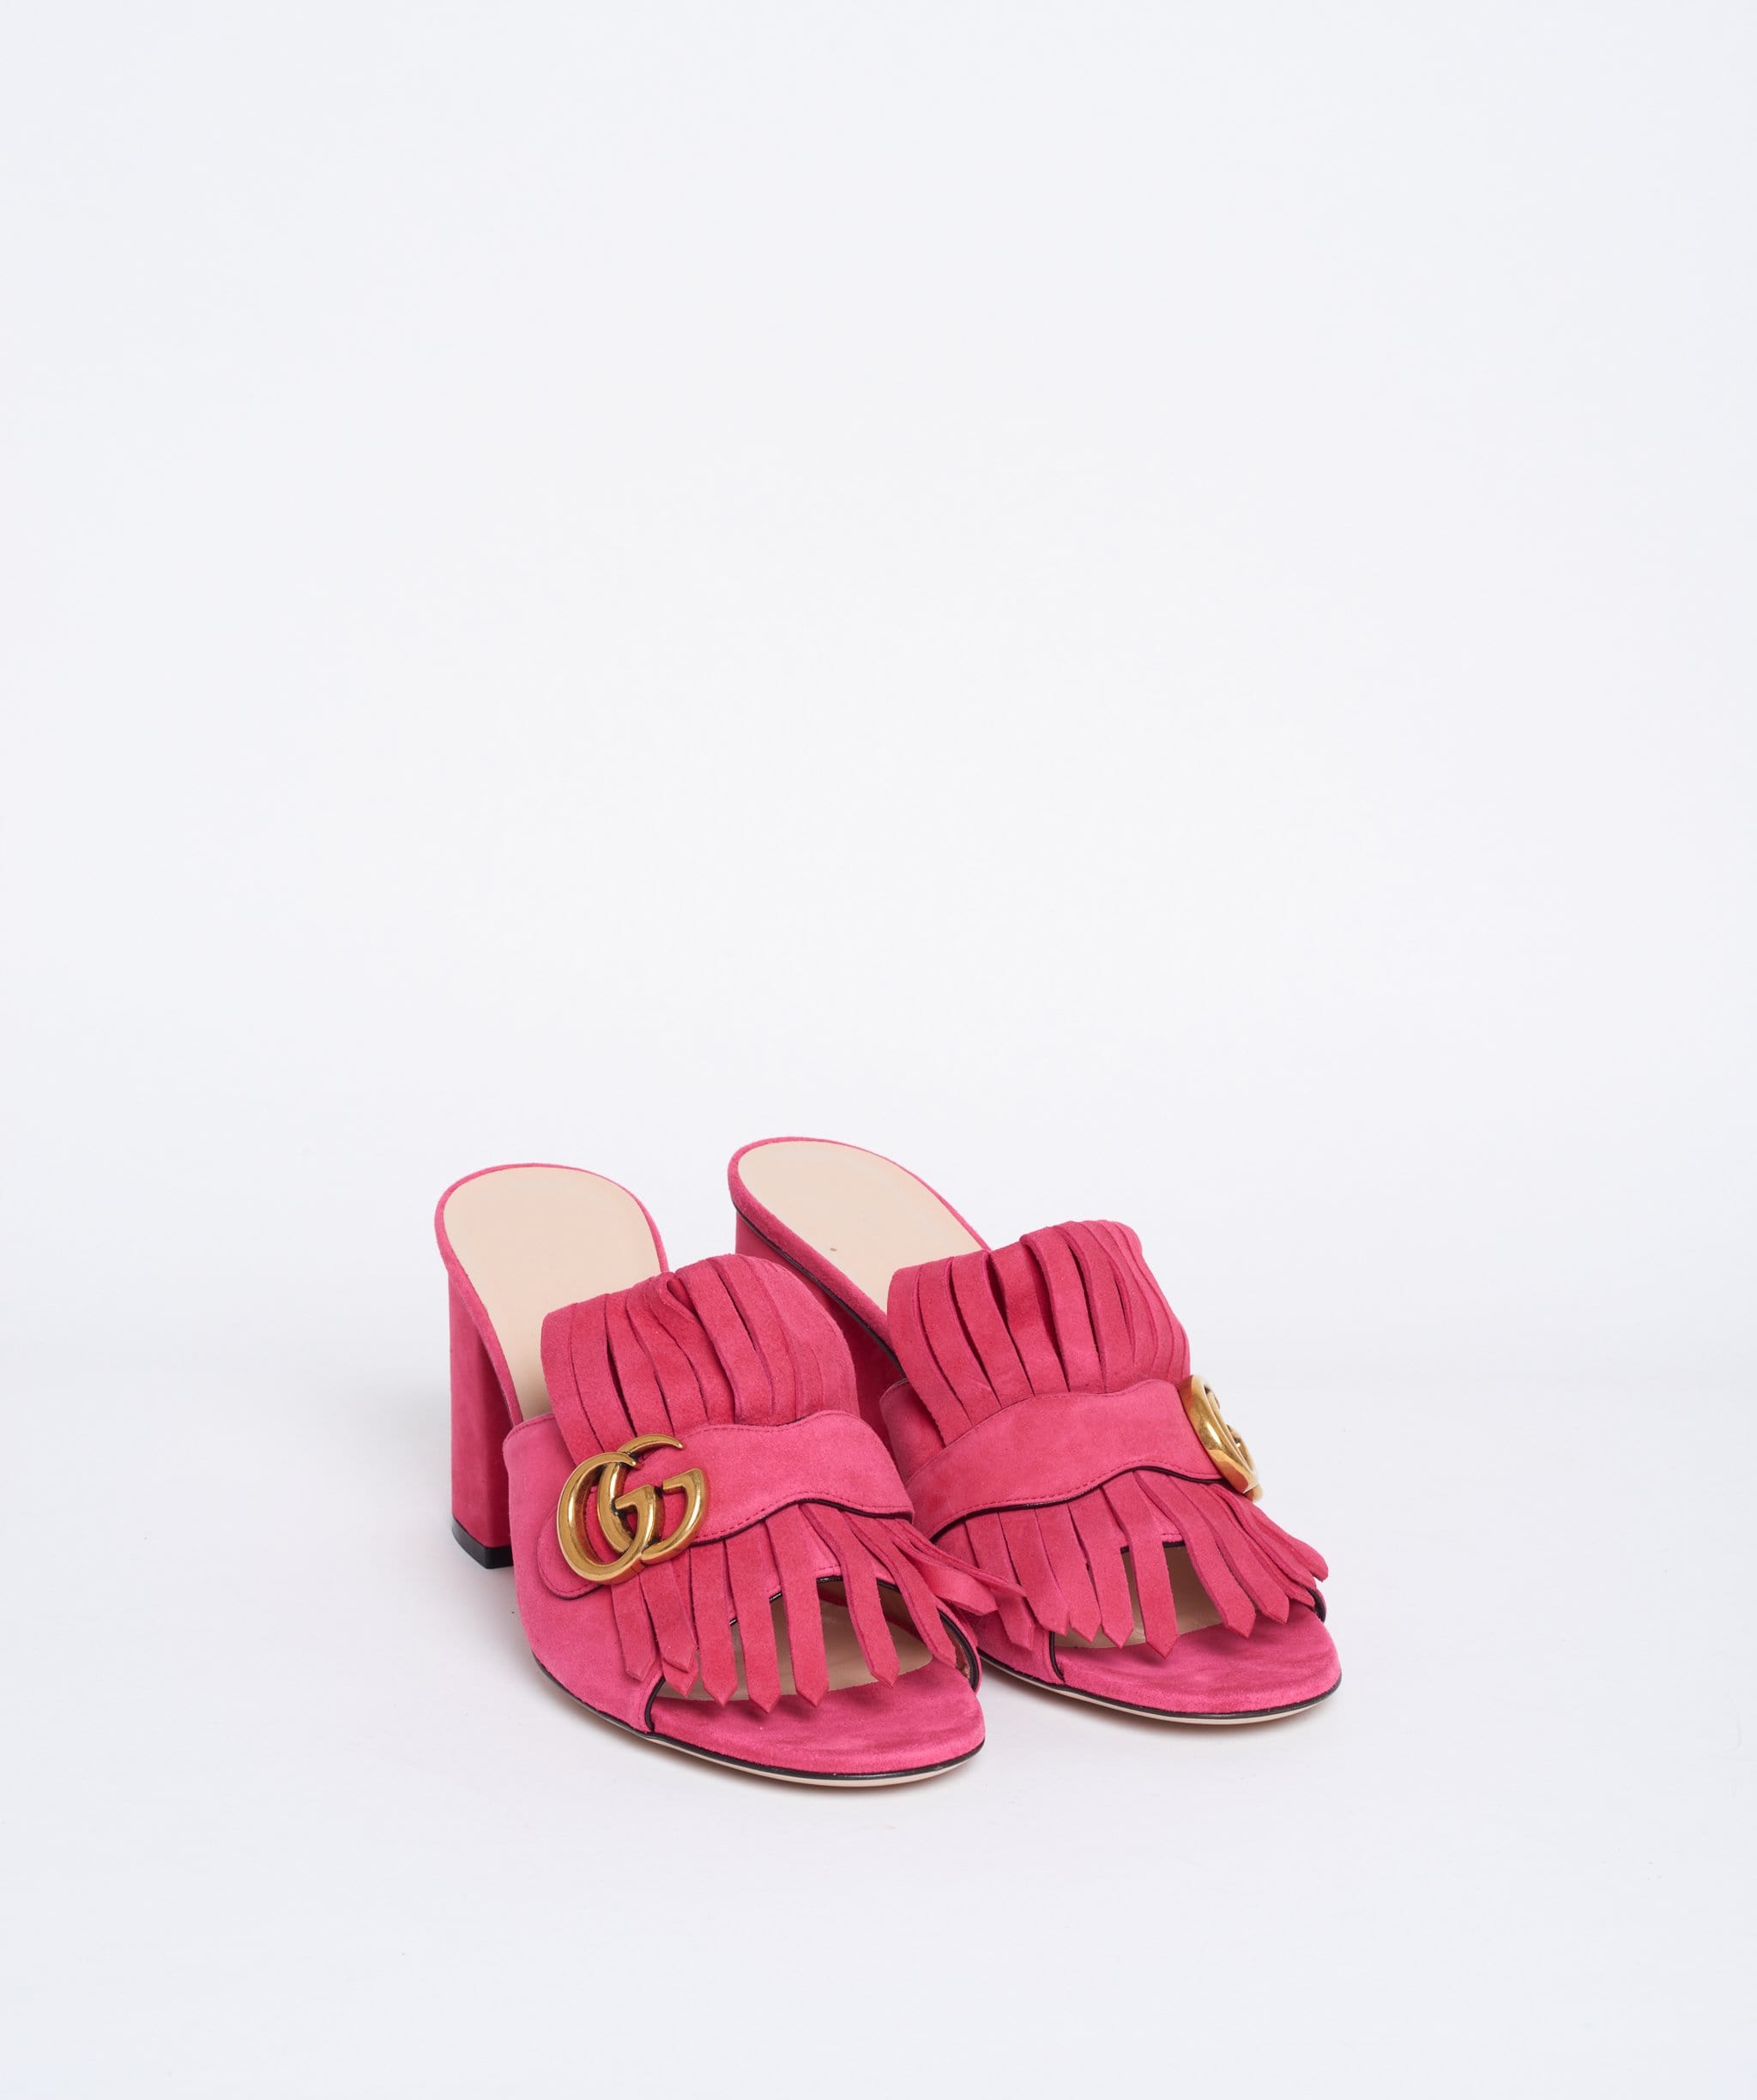 Gucci Gucci Pink Suede Marmont Mules size 39.5